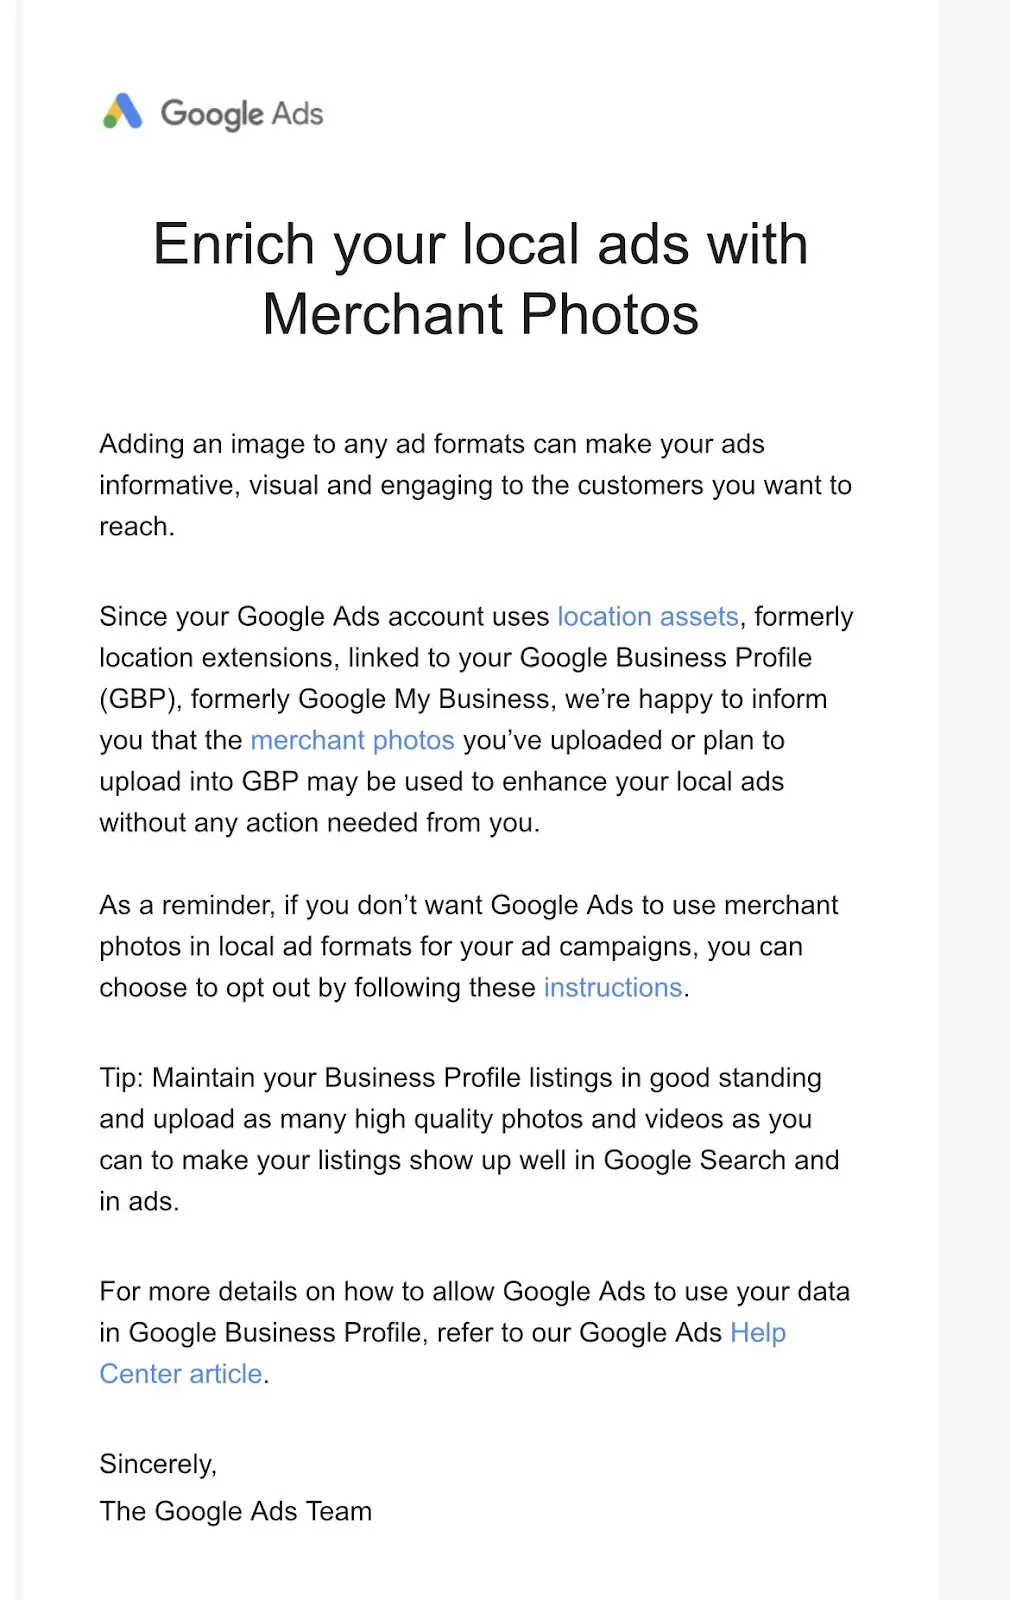 Google's email to Mike Blumenthal on new ad format